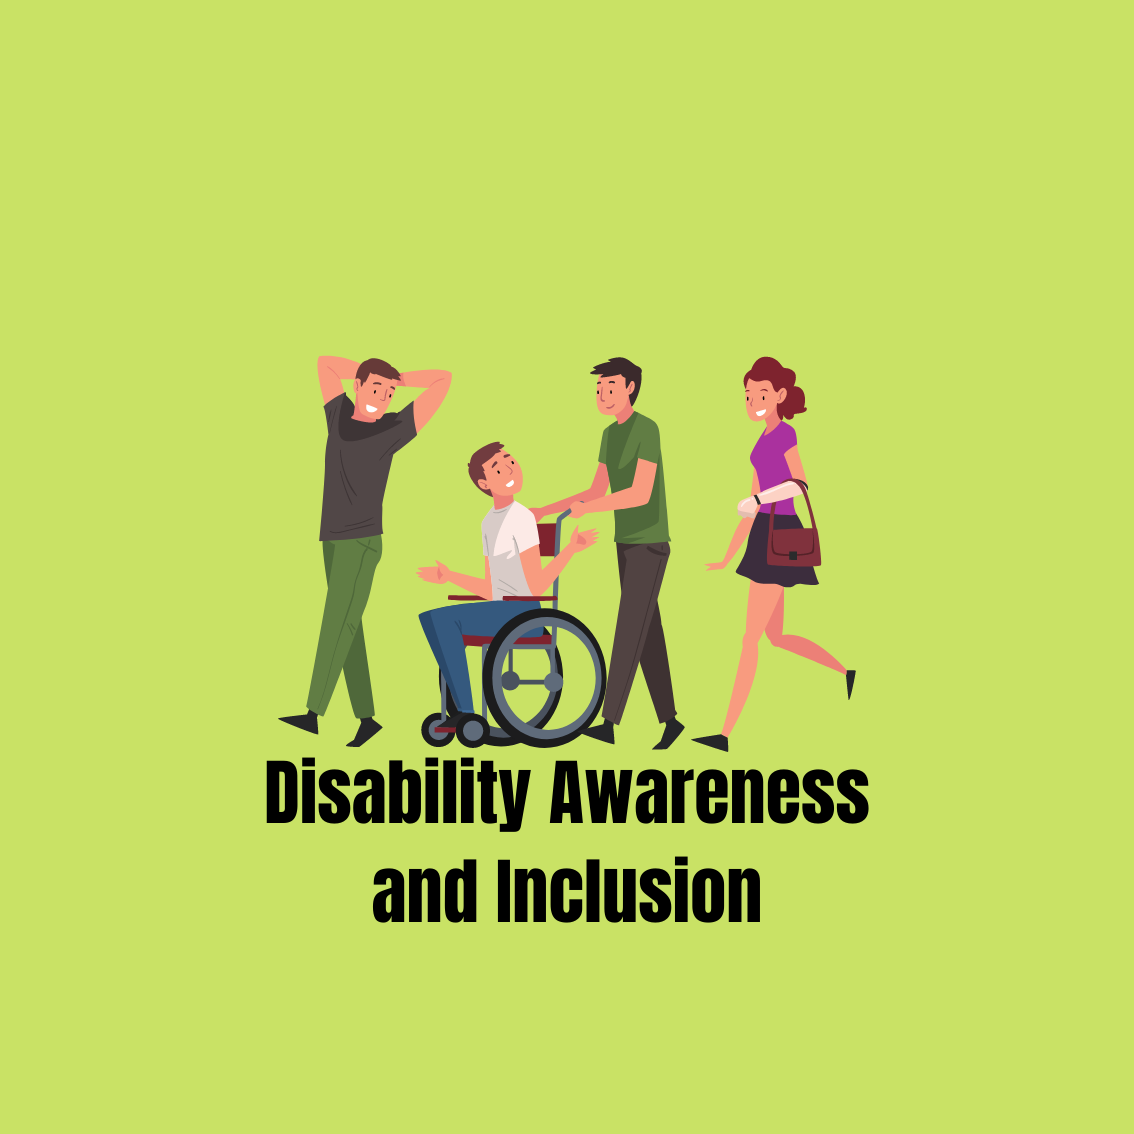 Disability Awareness and Inclusion